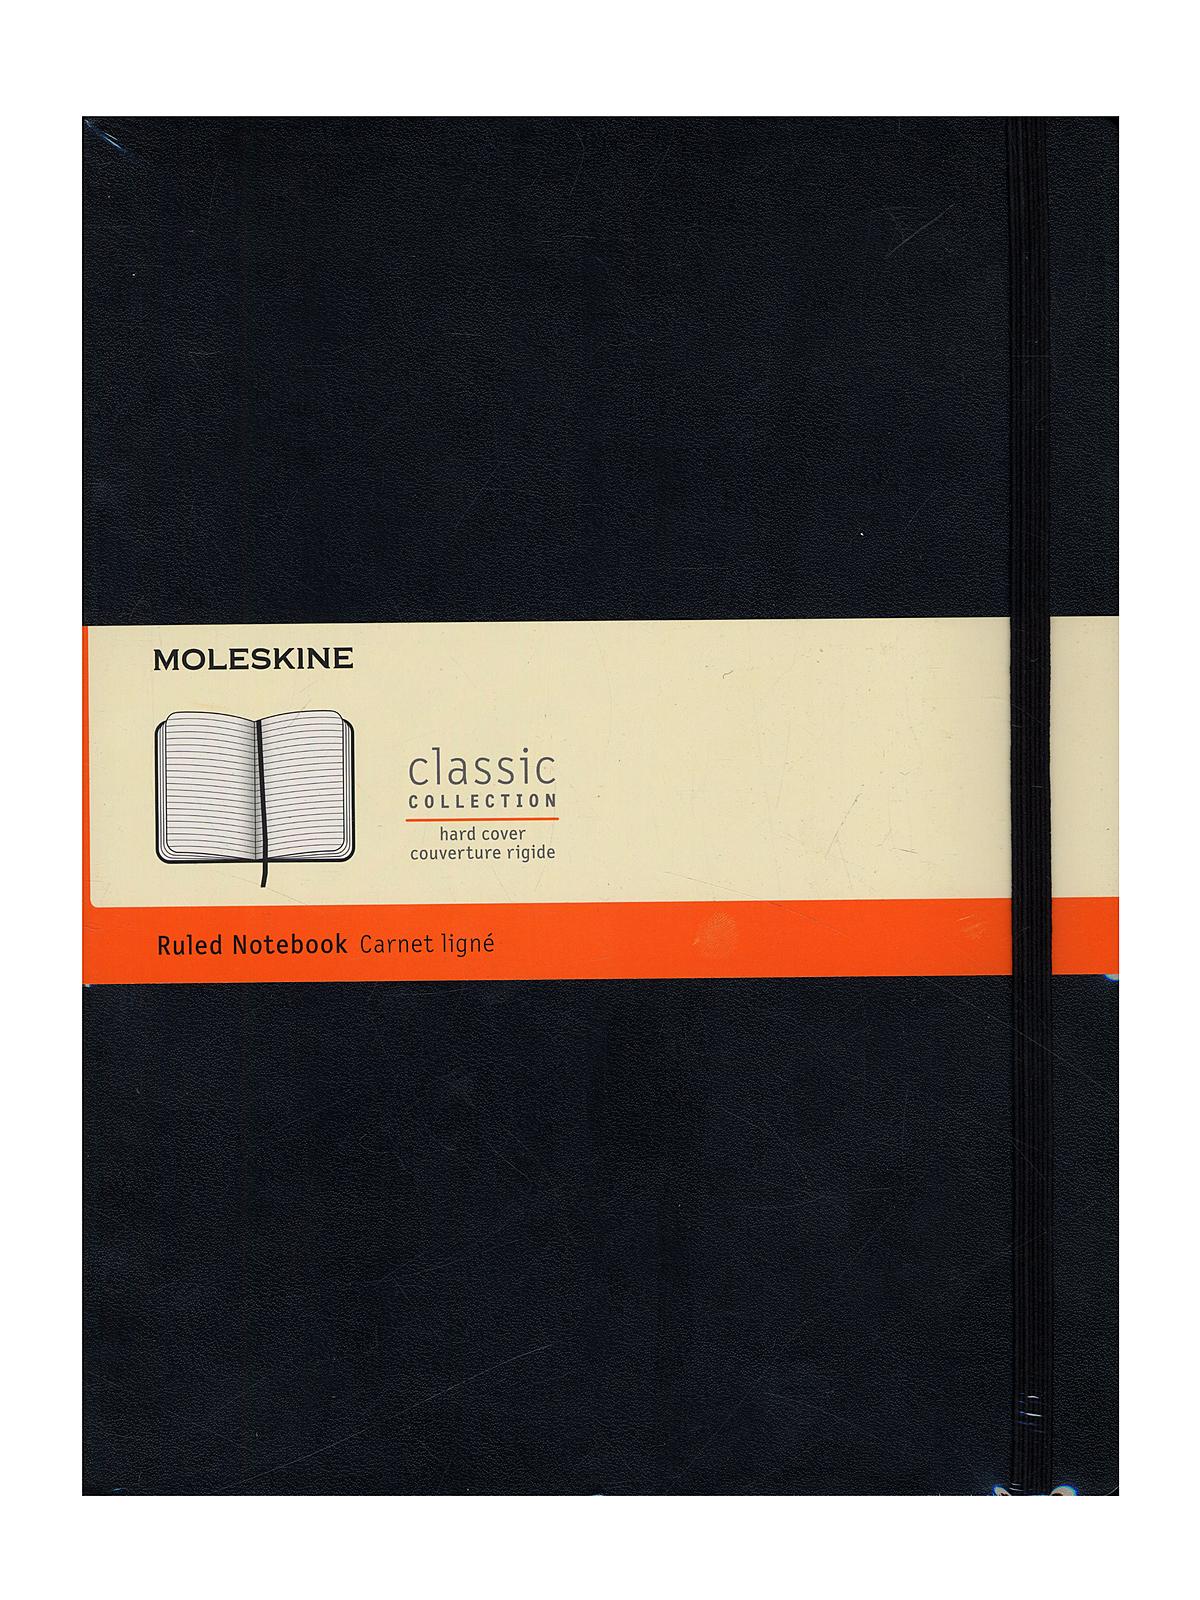 Classic Hard Cover Notebooks Black 7 1 2 In. X 9 3 4 In. 192 Pages, Lined